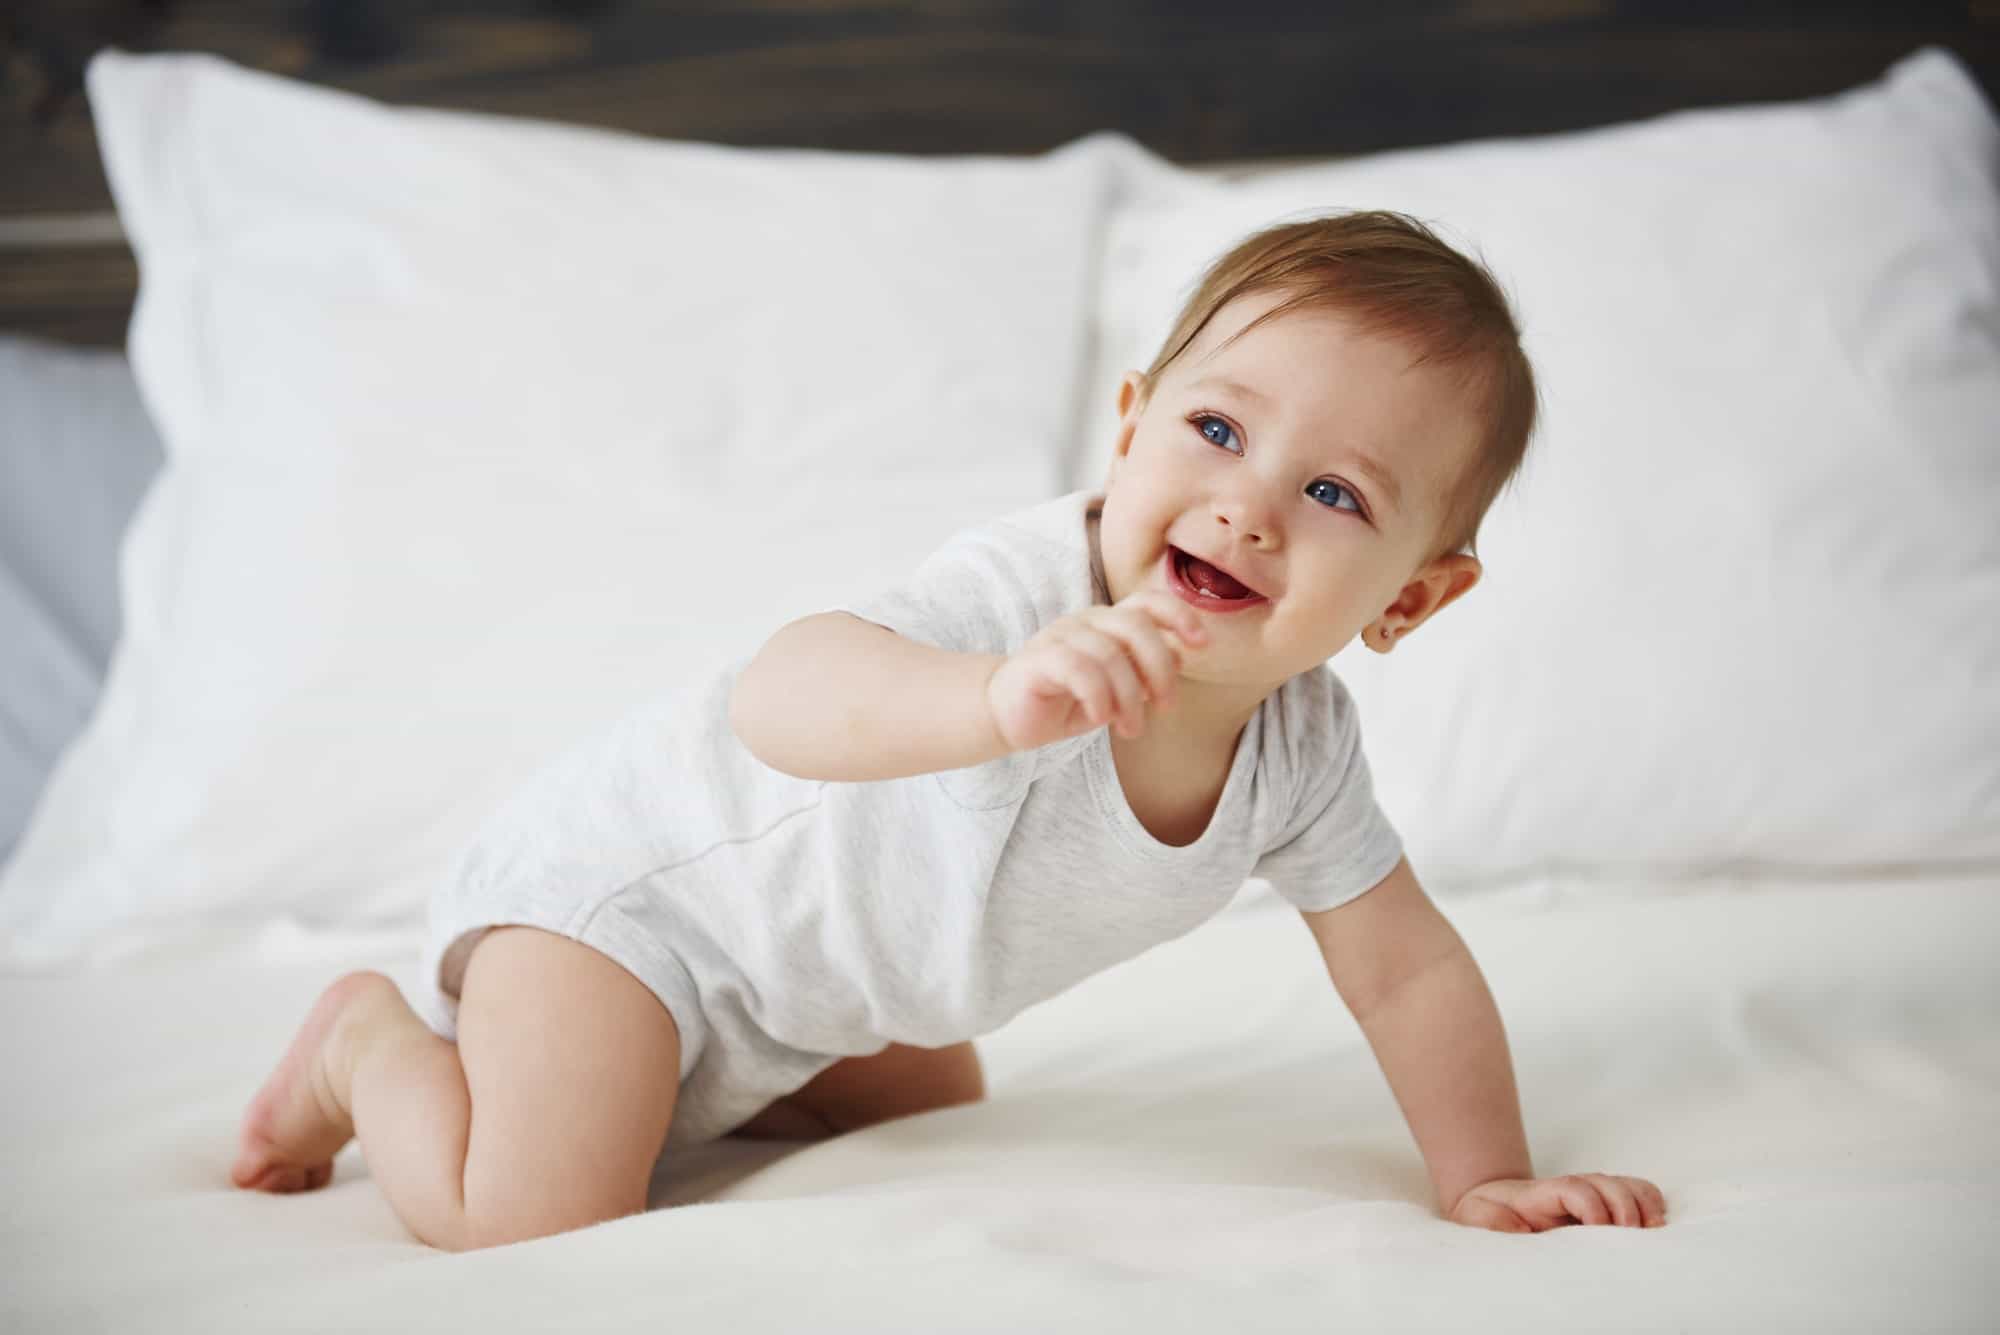 Baby Proofing Made Easy with Dreambaby